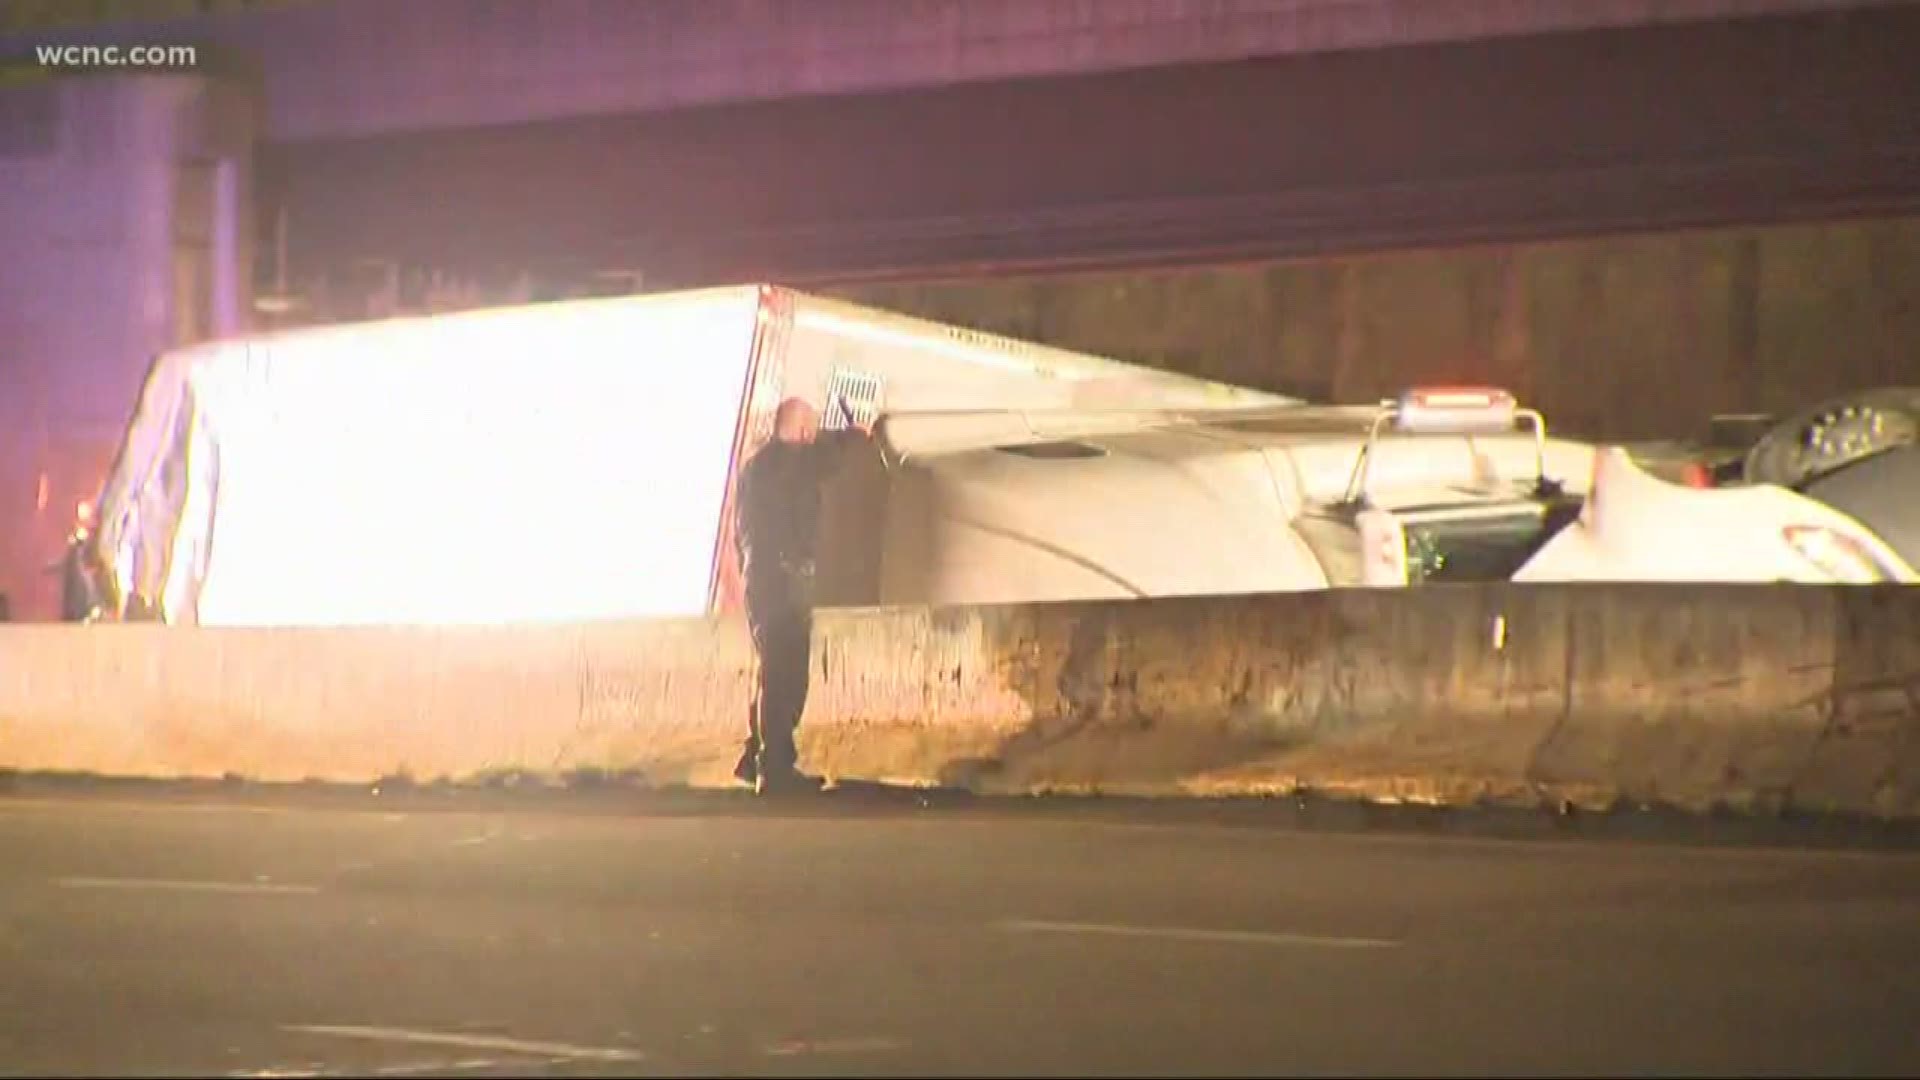 The tractor-trailer overturned around 6:15 p.m. Wednesday. At this time, it's not known if there were any injuries.